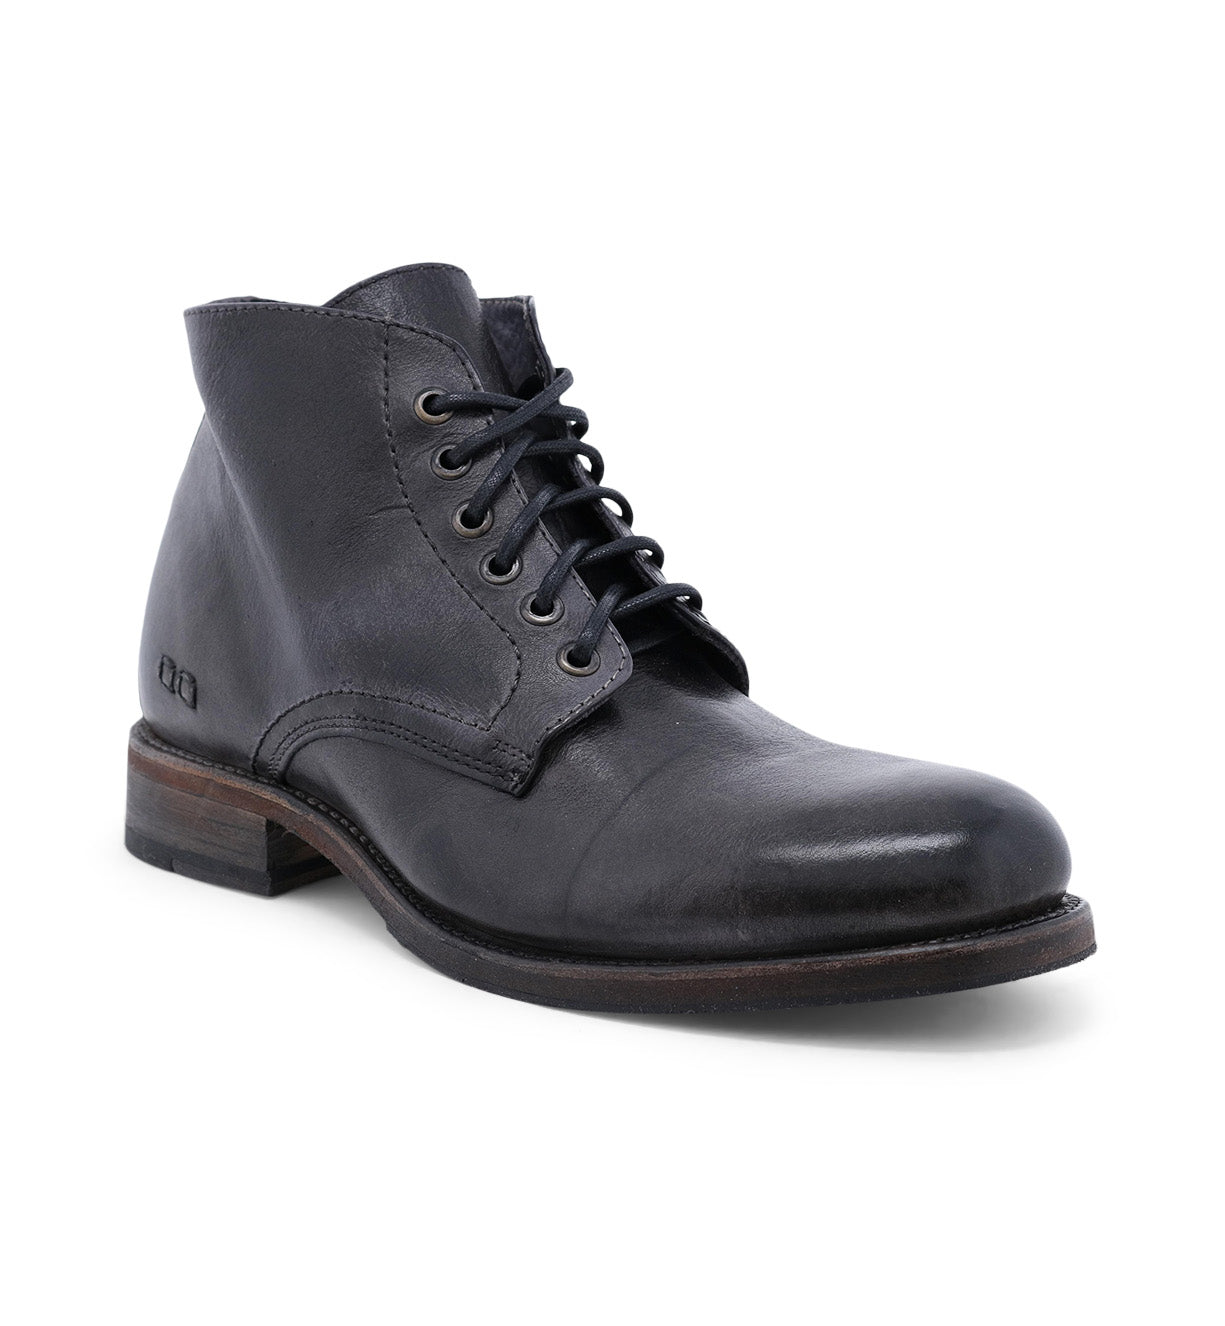 Bed Stu Bradley Black Rustic Boot for men, isolated on a white background.